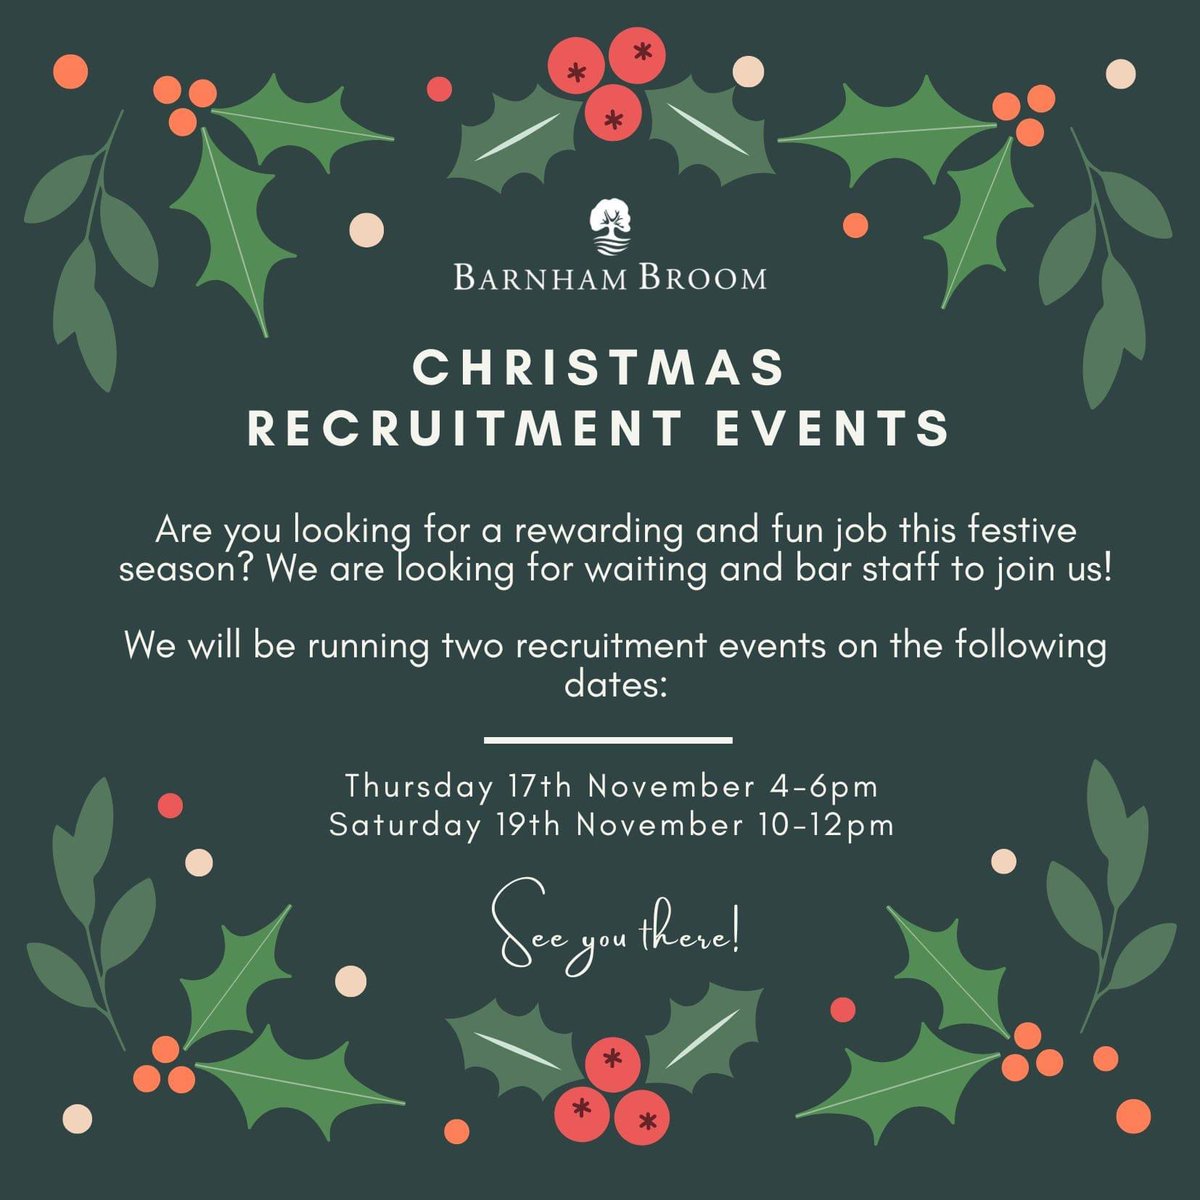 🎄⭐️🎁 Christmas Recruitment Events 🎁⭐️🎄 If you are you looking to earn extra this festive season then look no further! Pop along to one of our two recruitment events in our Colton Suite at Barnham Broom. Alternatively, email your CV and cover to careers@barnham-broom.co.uk